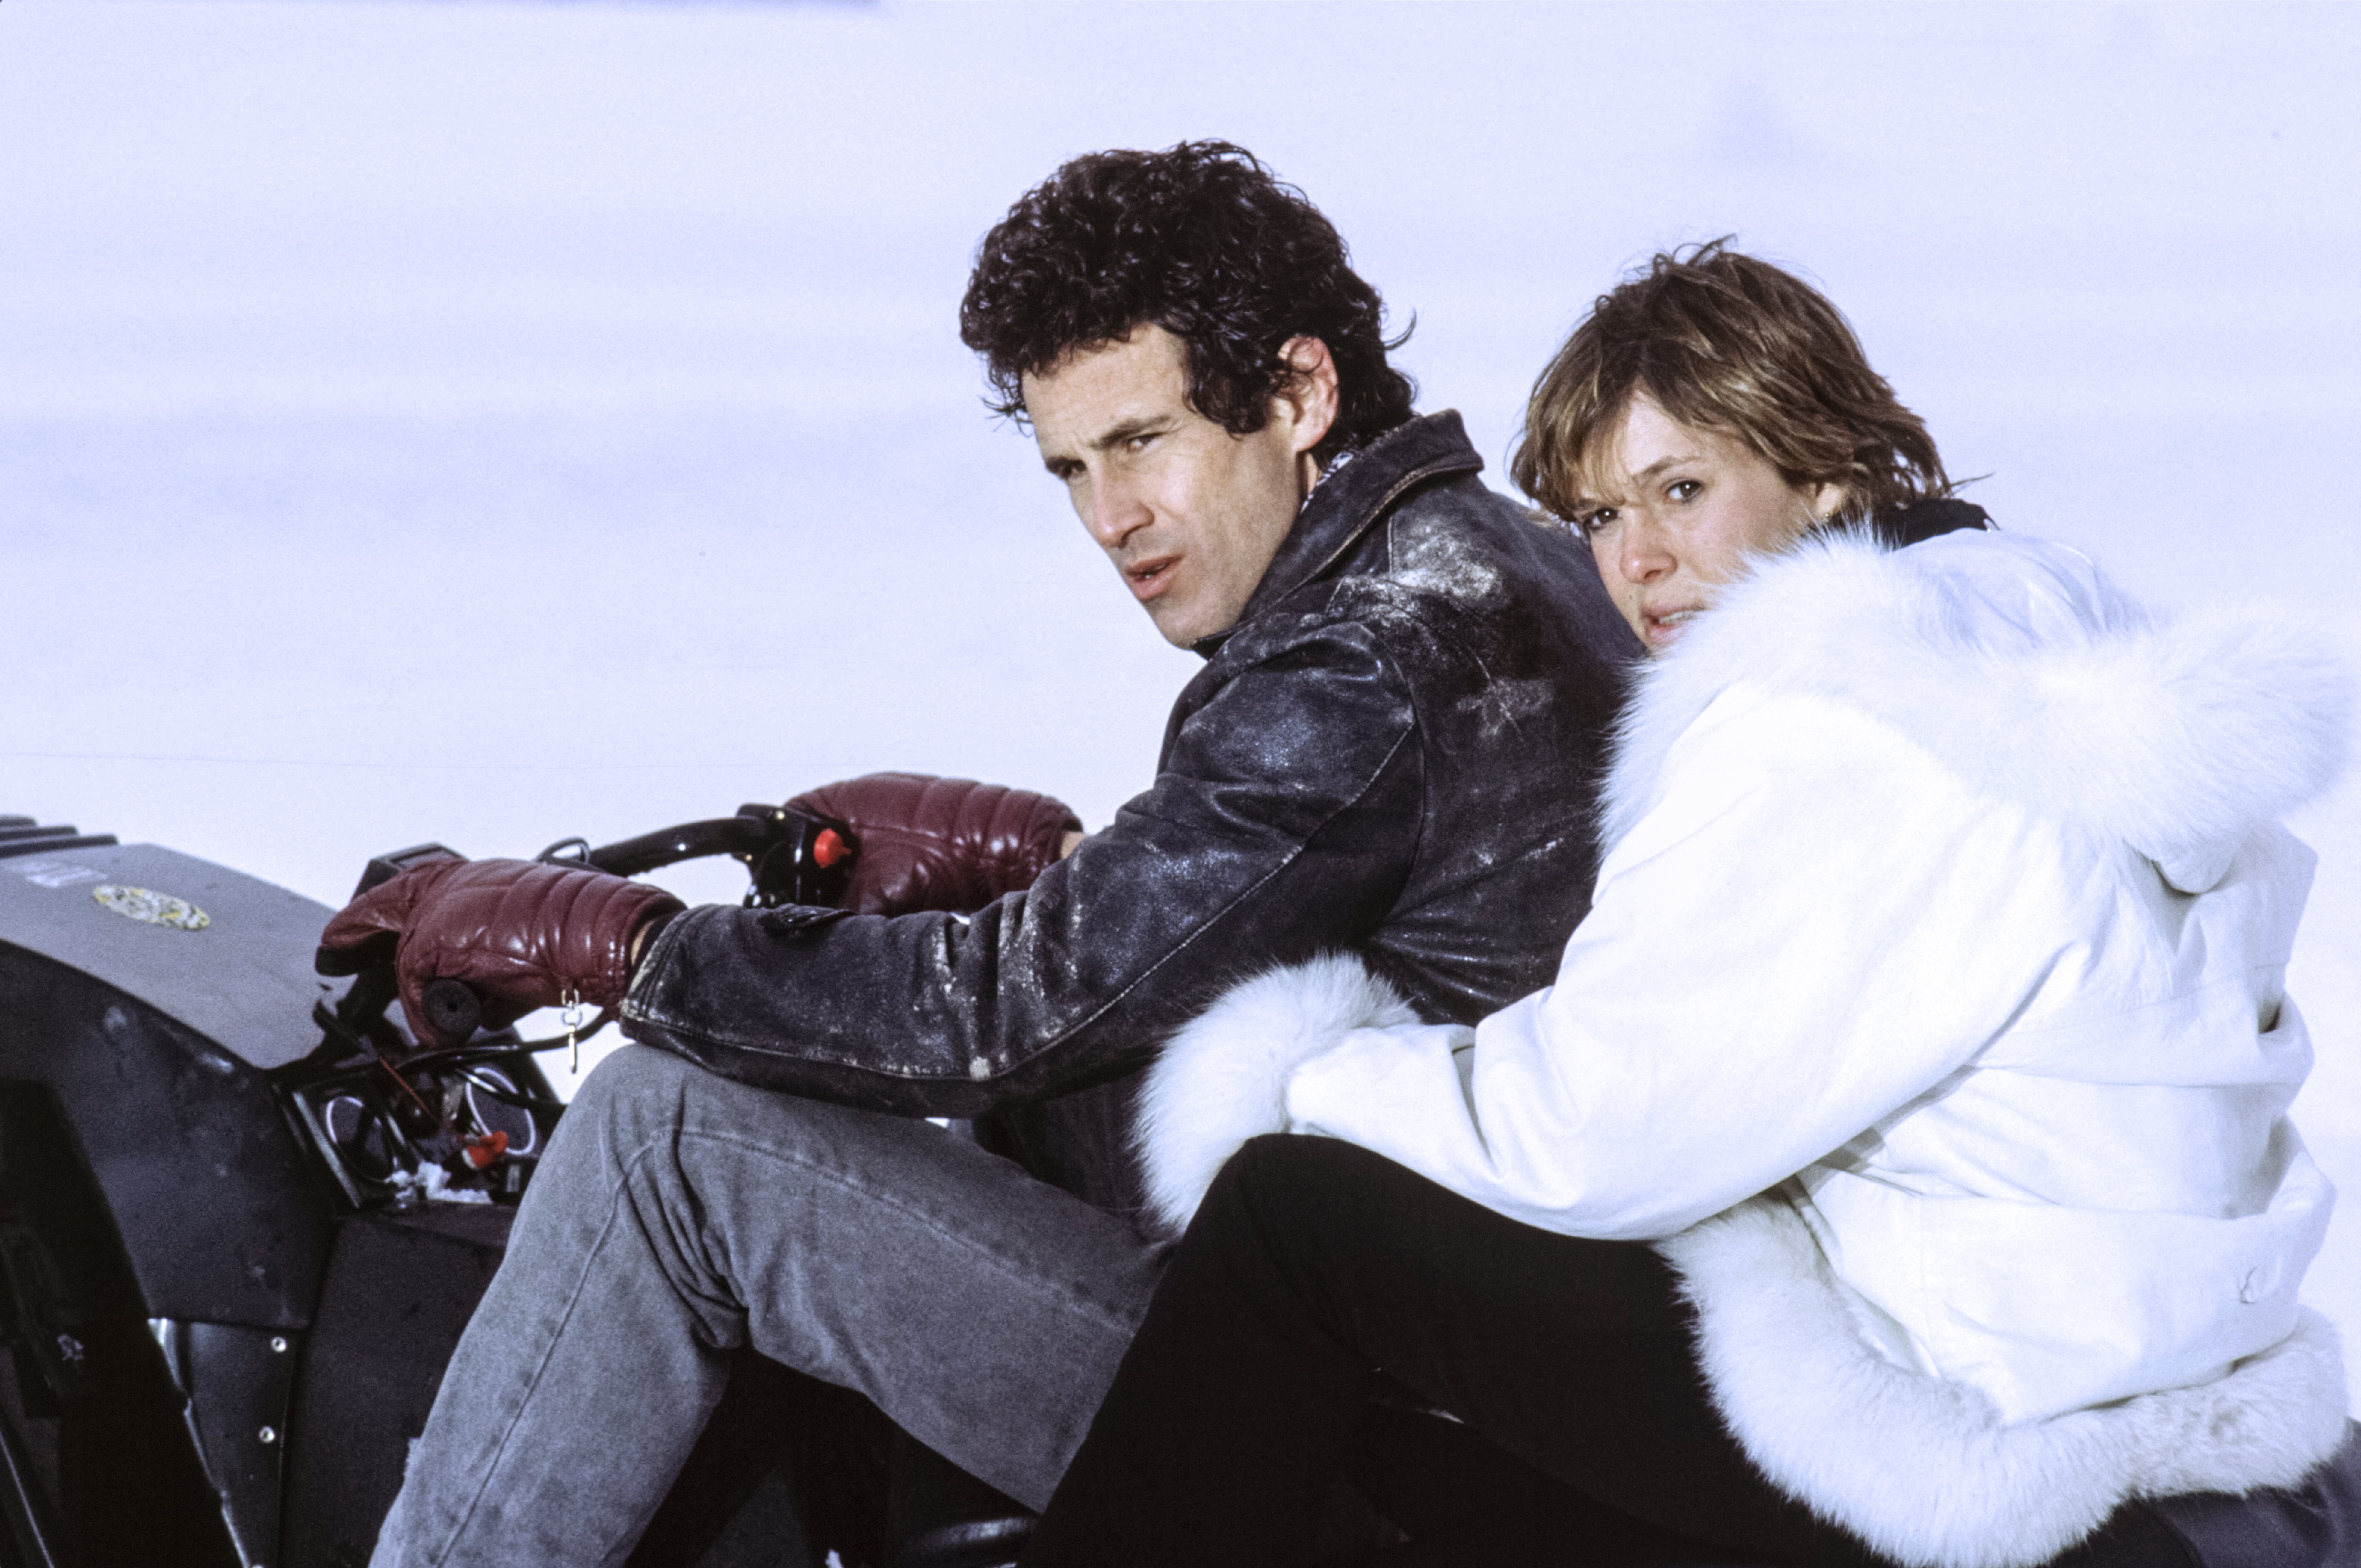 Michael Ontkean and Kristy McNichol during the filming of "Just the Way You Are" in 1984, France. | Source: Jacques PRAYER/Gamma-Rapho/Getty Images